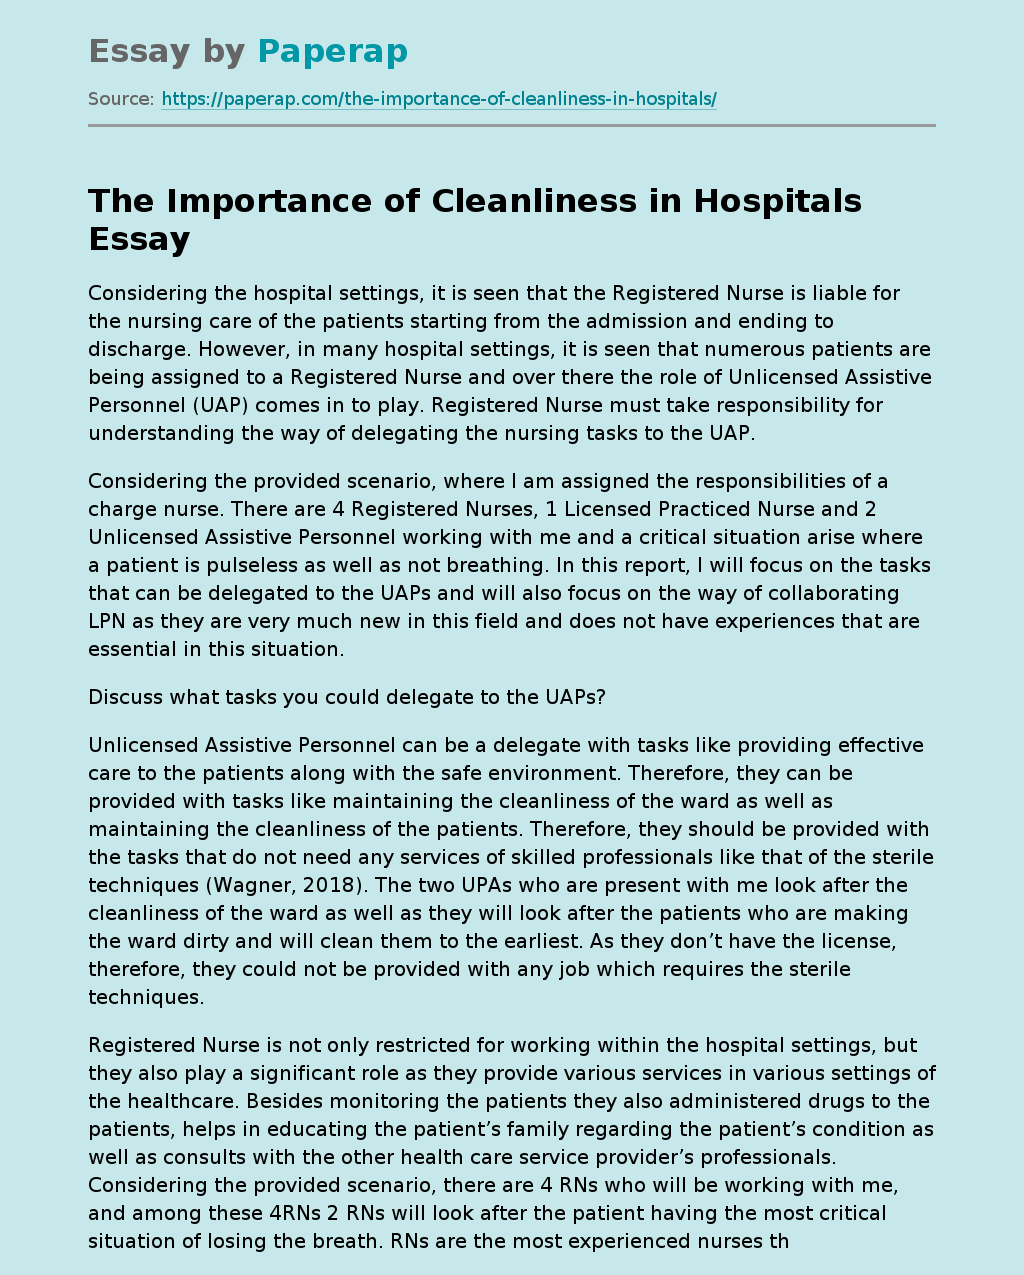 The Importance of Cleanliness in Hospitals